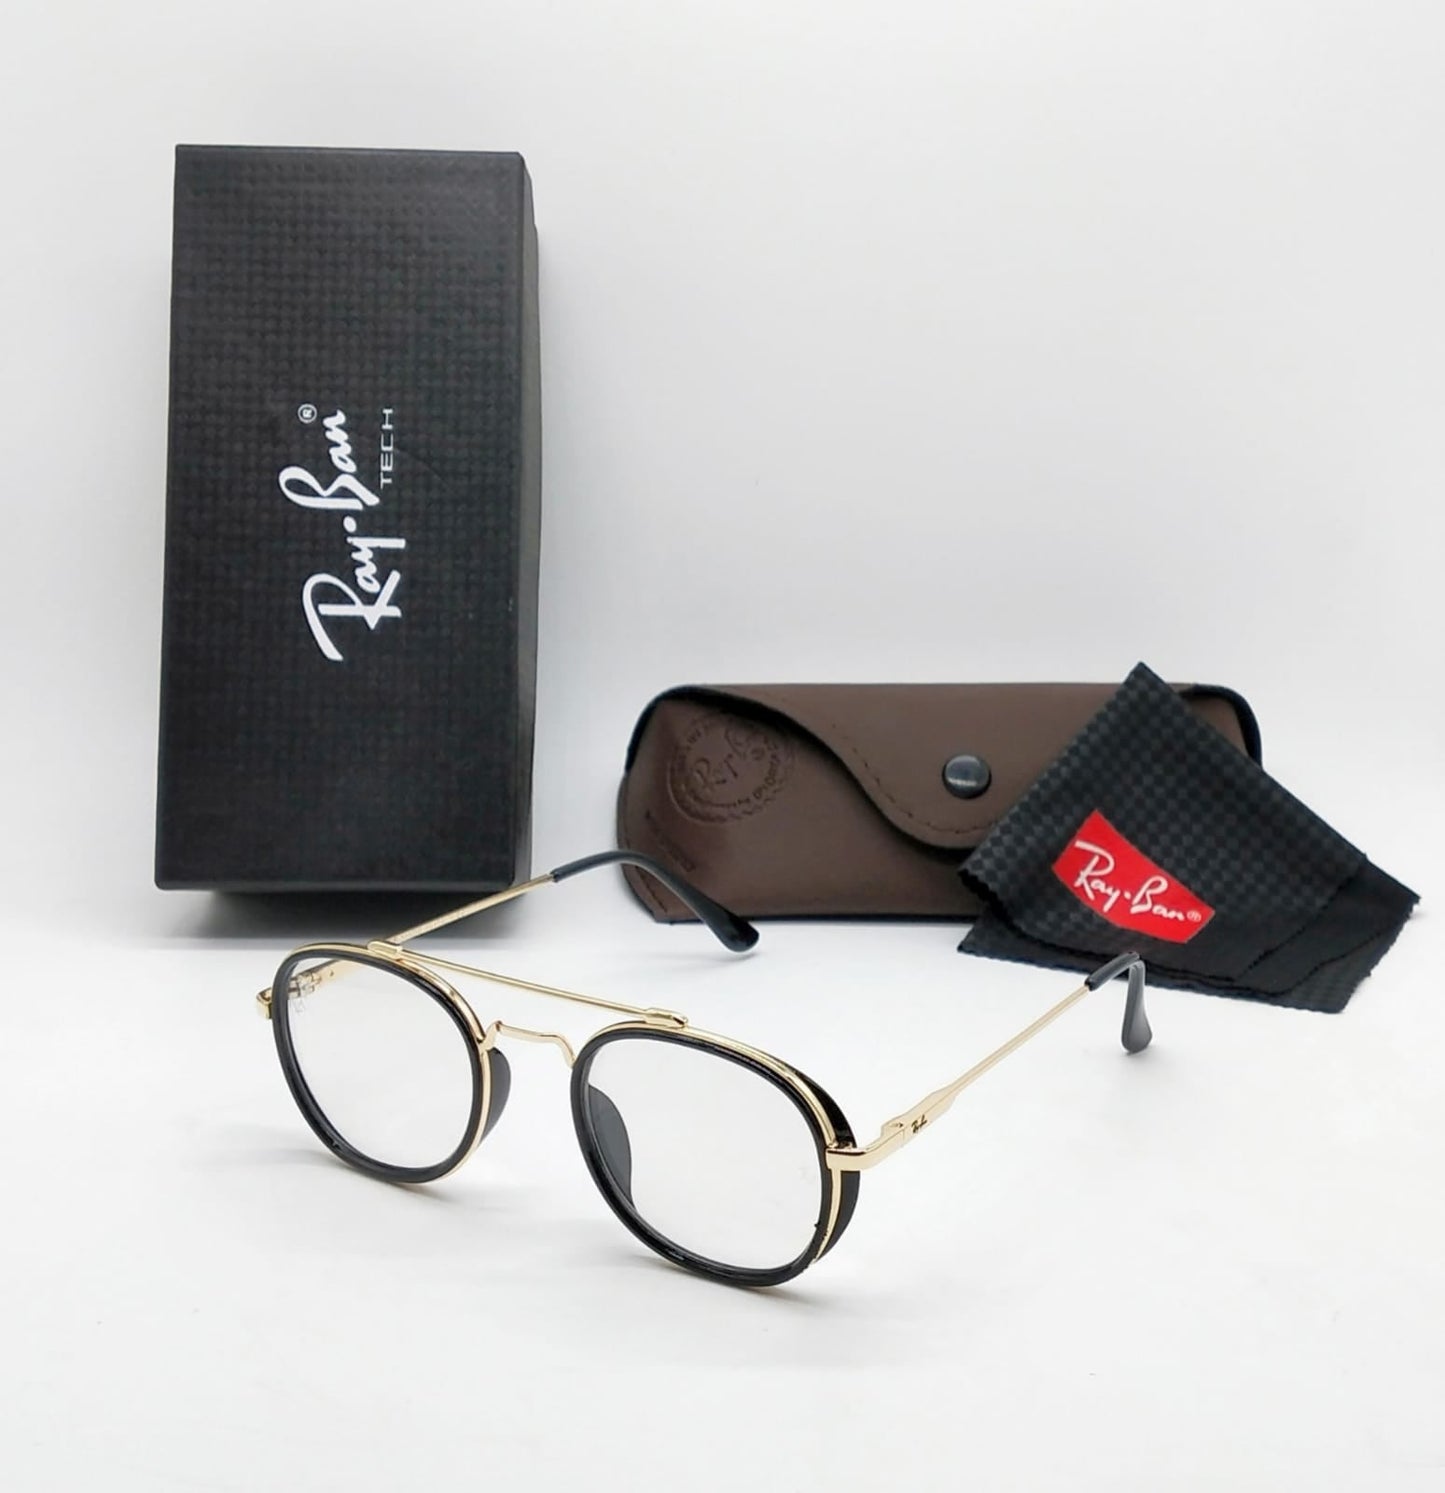 Rayban Brand New stylish Men's And Women's Sunglass Heavy Quality Transparent Glass And Golden Frame RB-1106